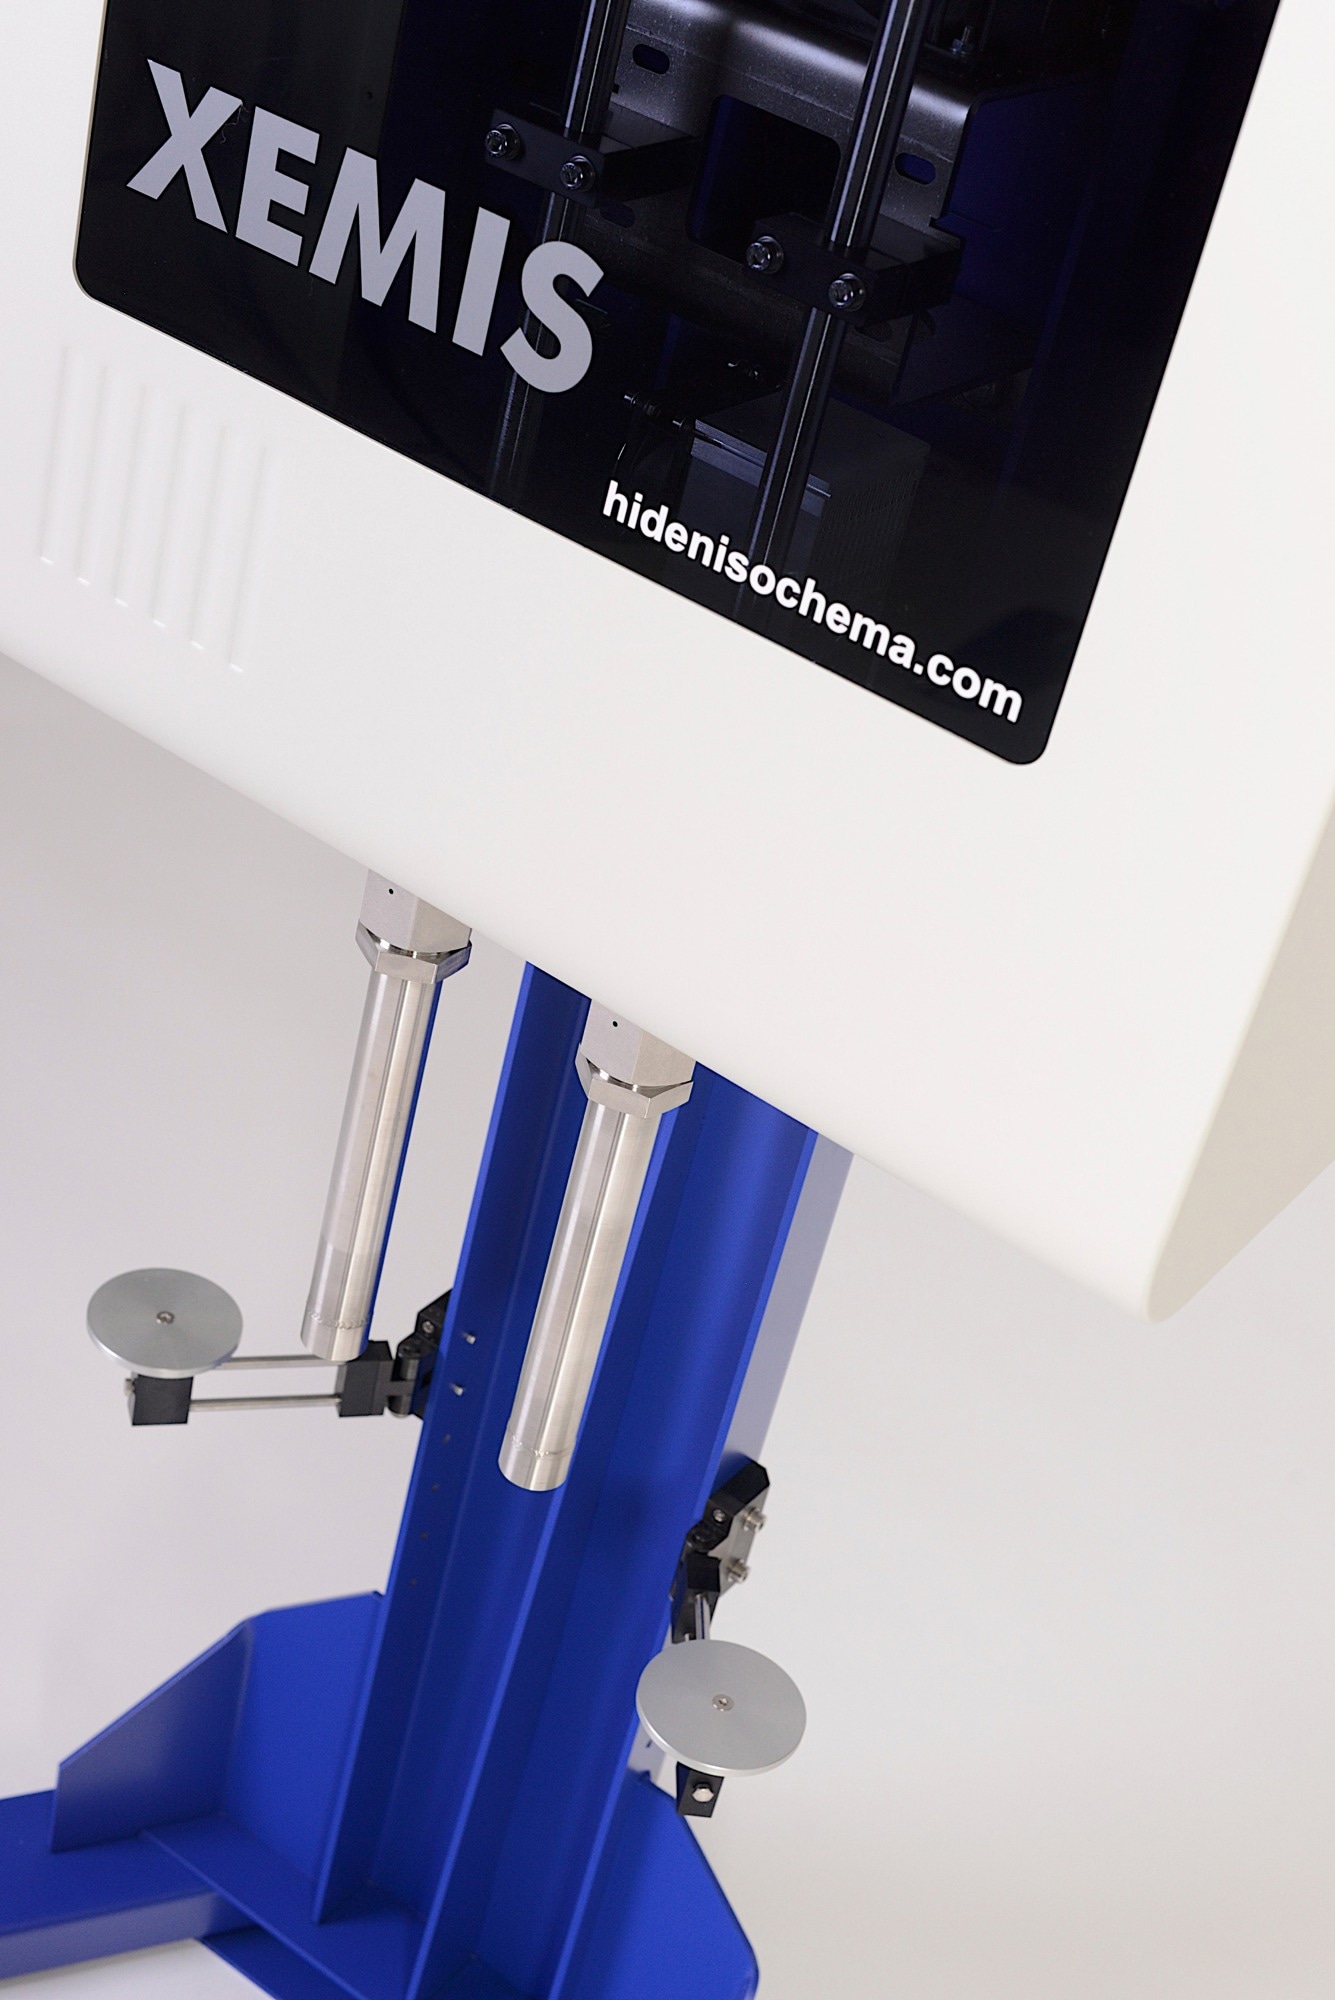 Introducing XEMIS: Versatile Pure and Mixed Gas Sorption Analyzer